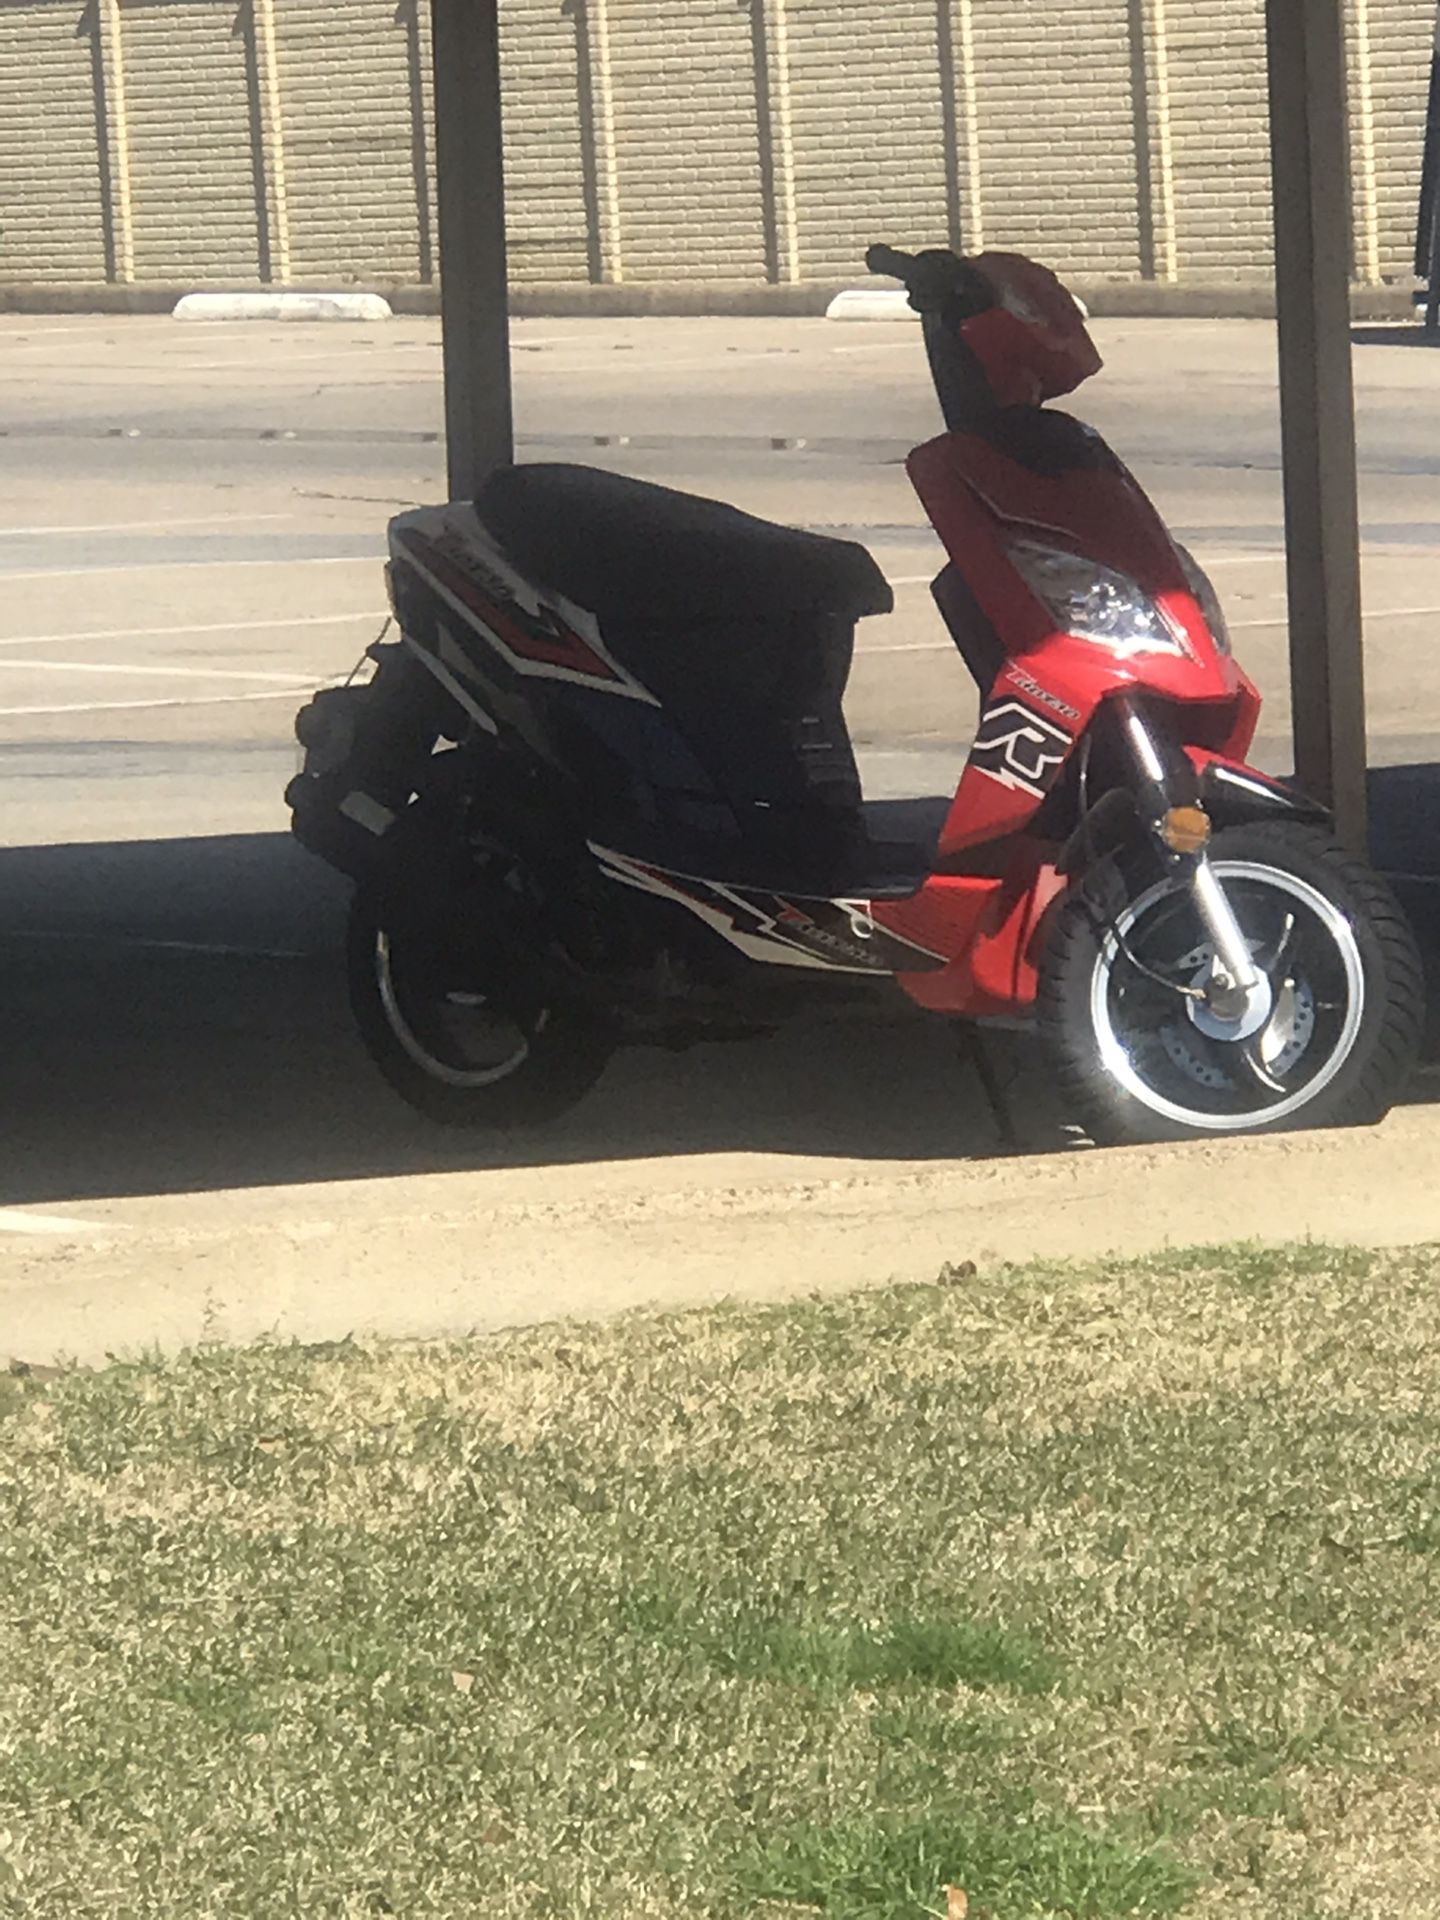 2014 like new moped $700 clean title